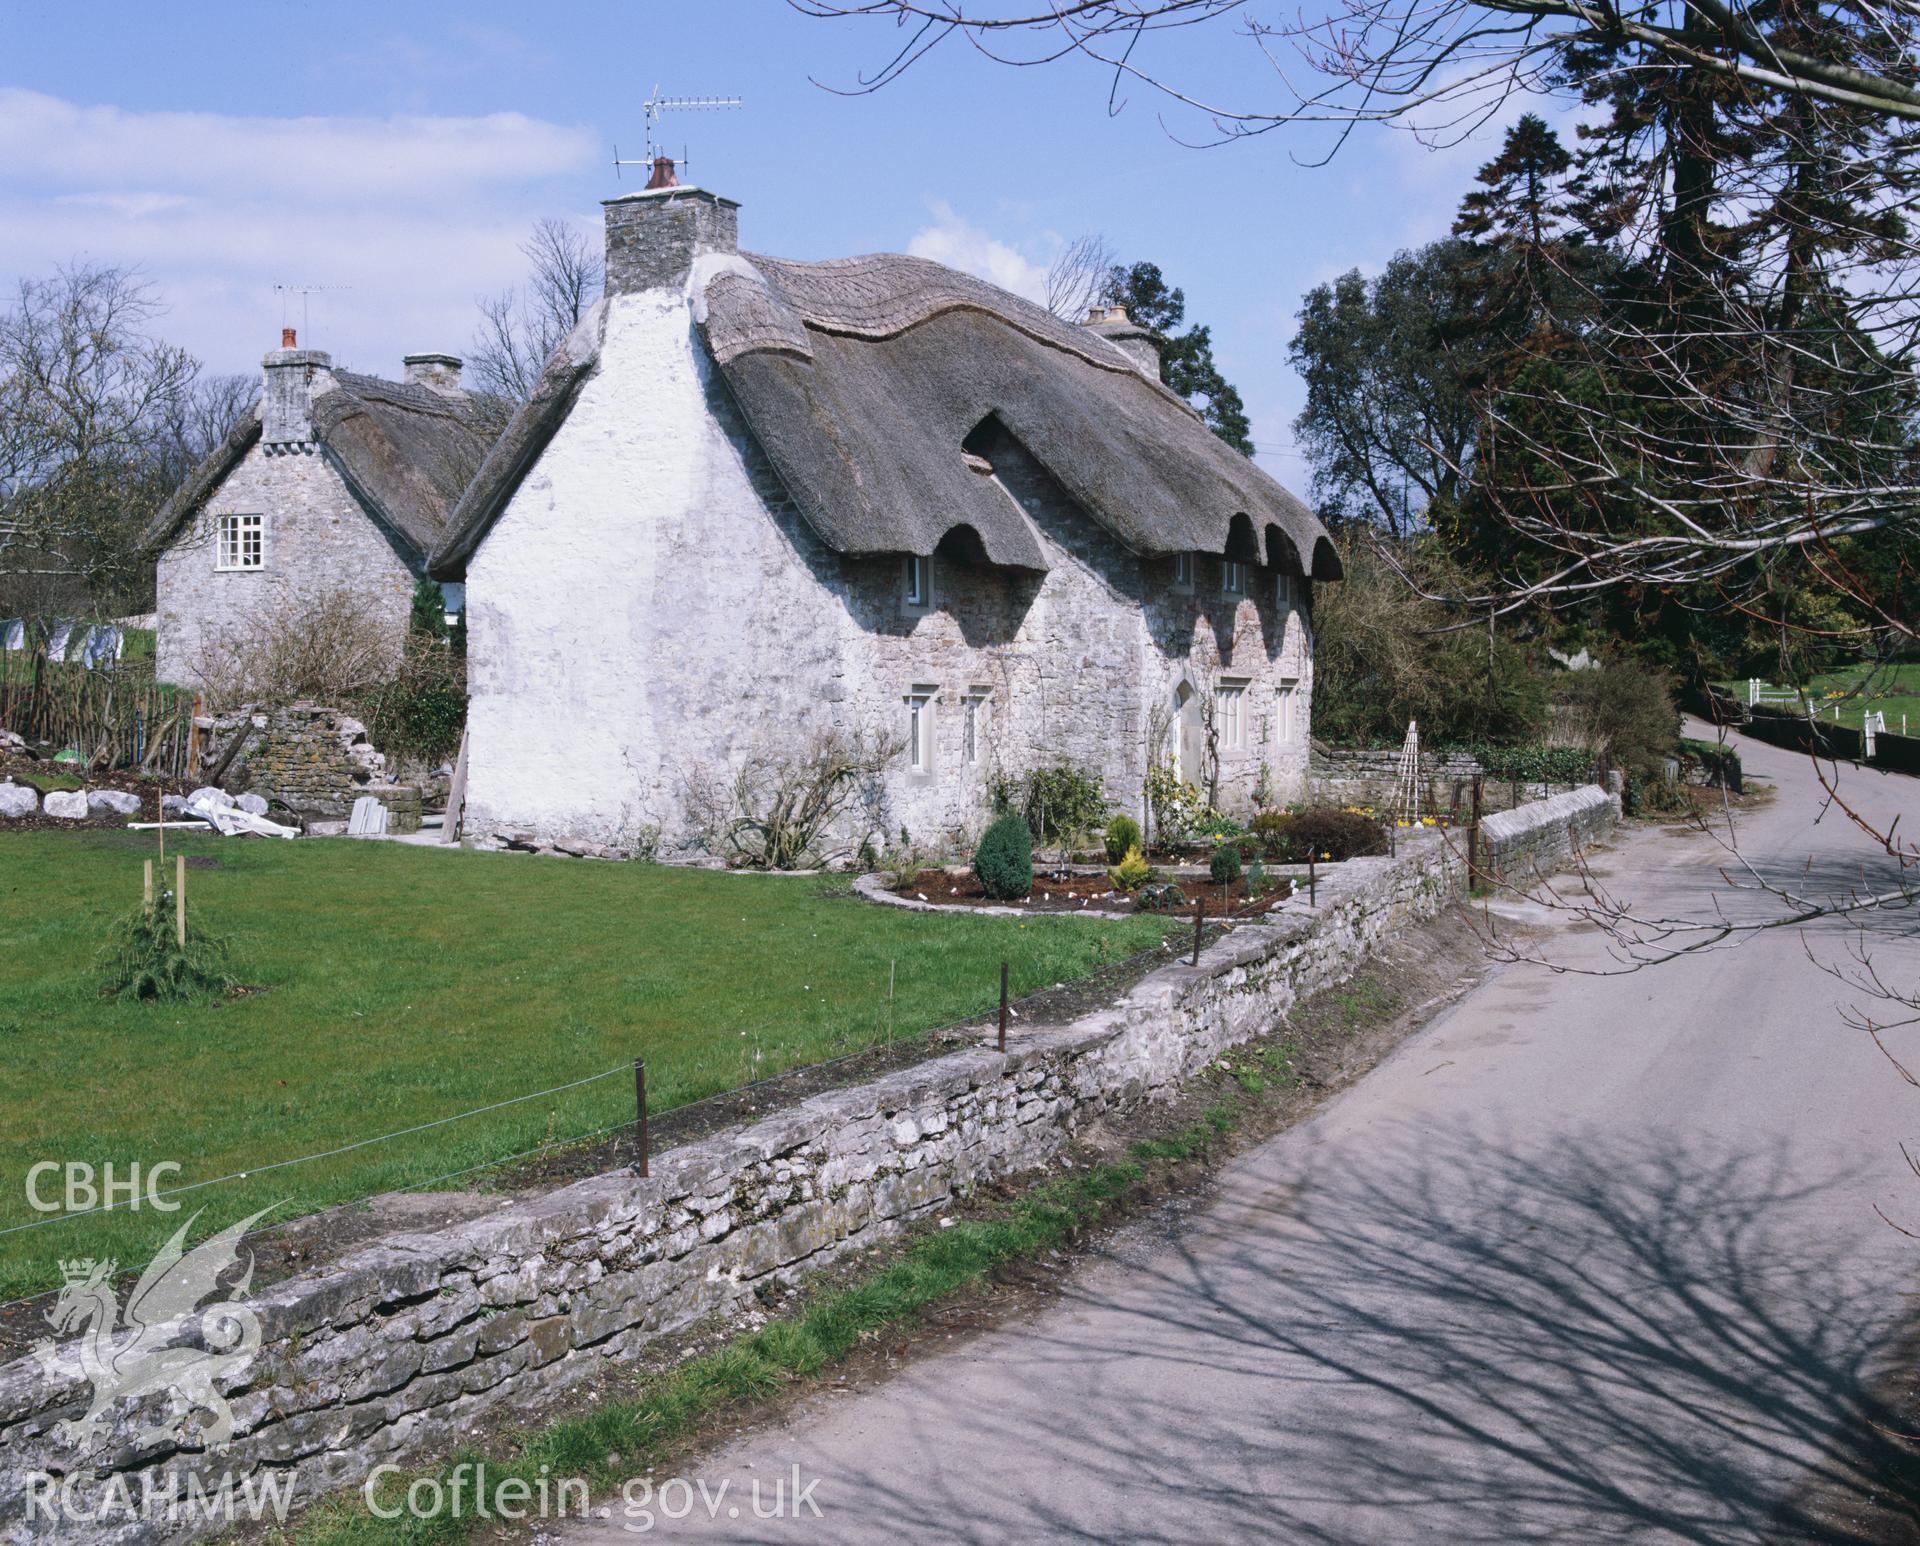 RCAHMW colour transparency showing view of Church Cottage, Merthyr Mawr.